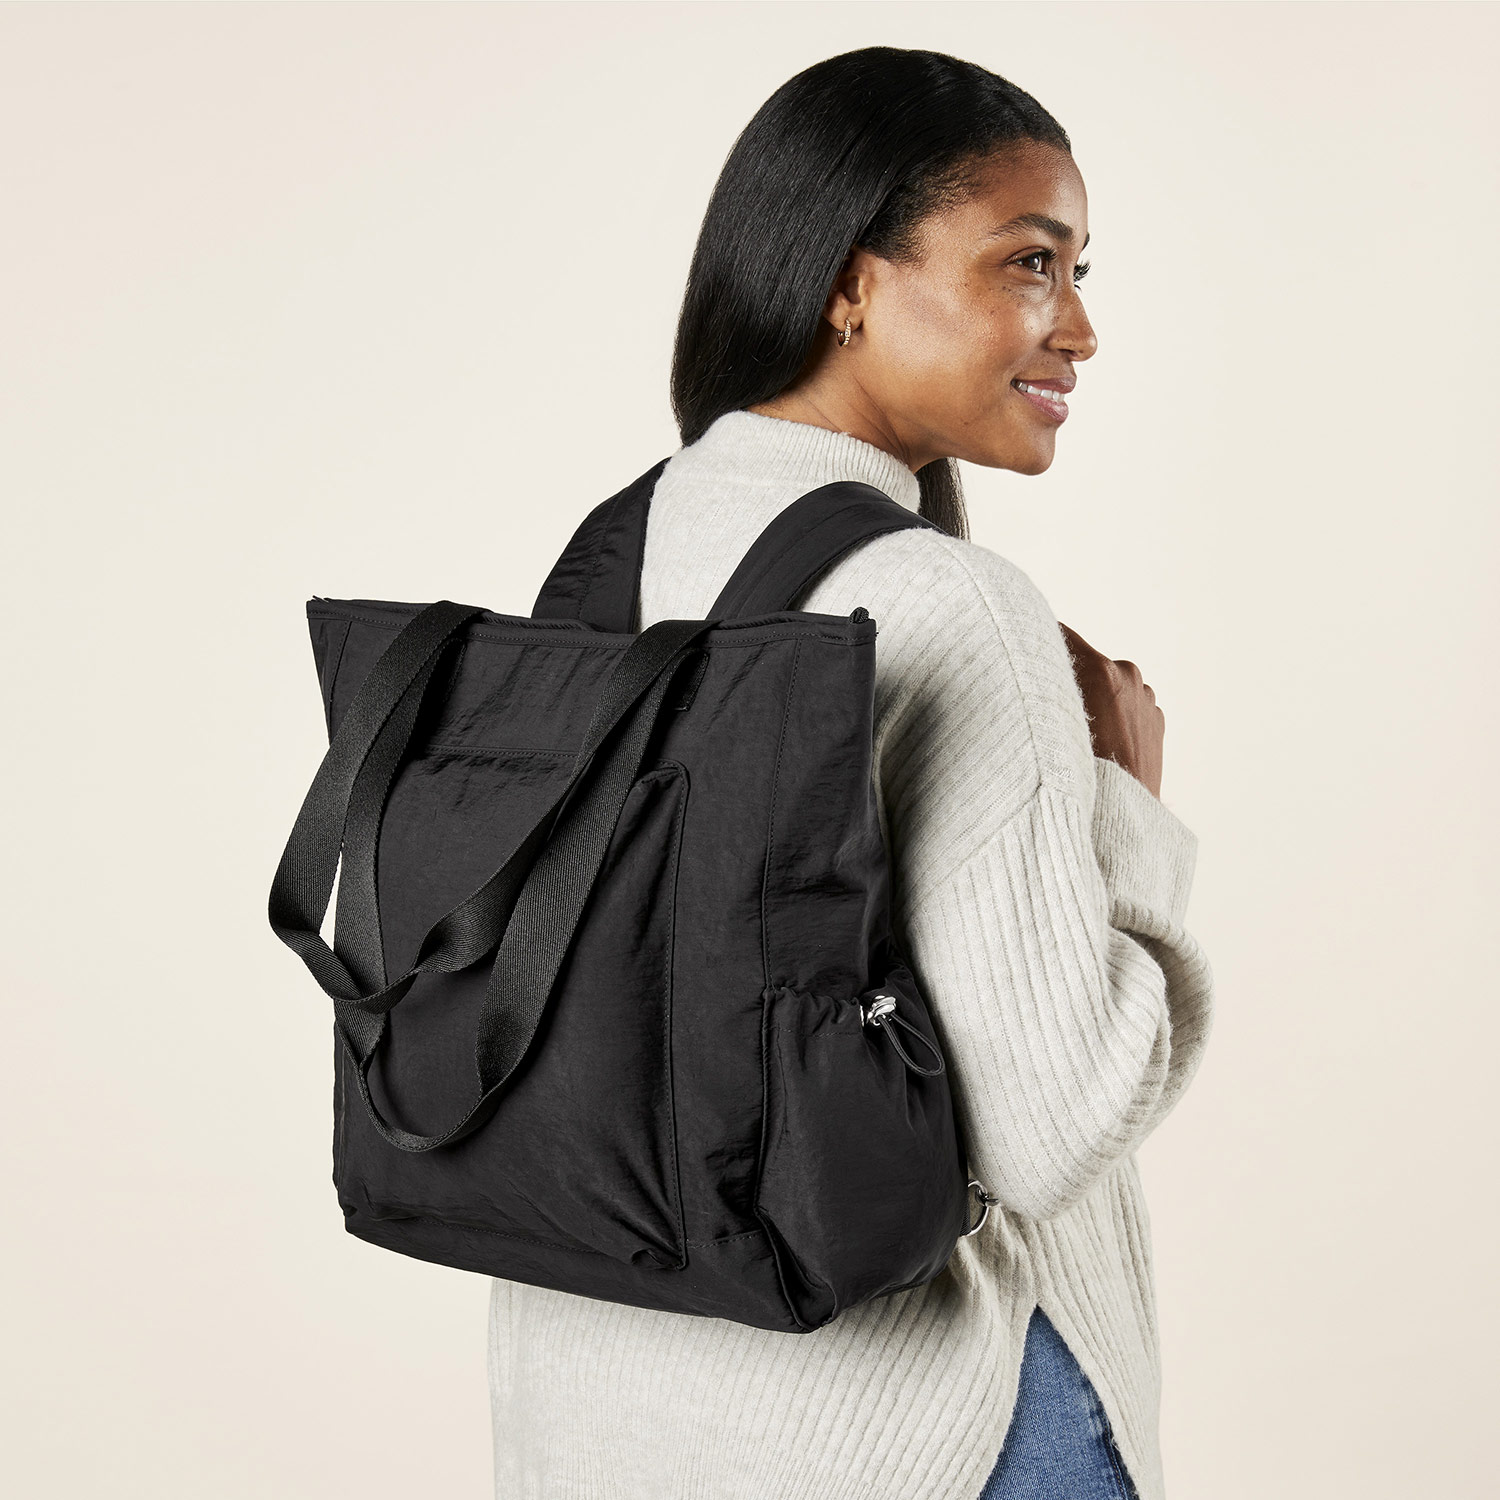 The Makes Convertible Backpack Is 31% Off Right Now